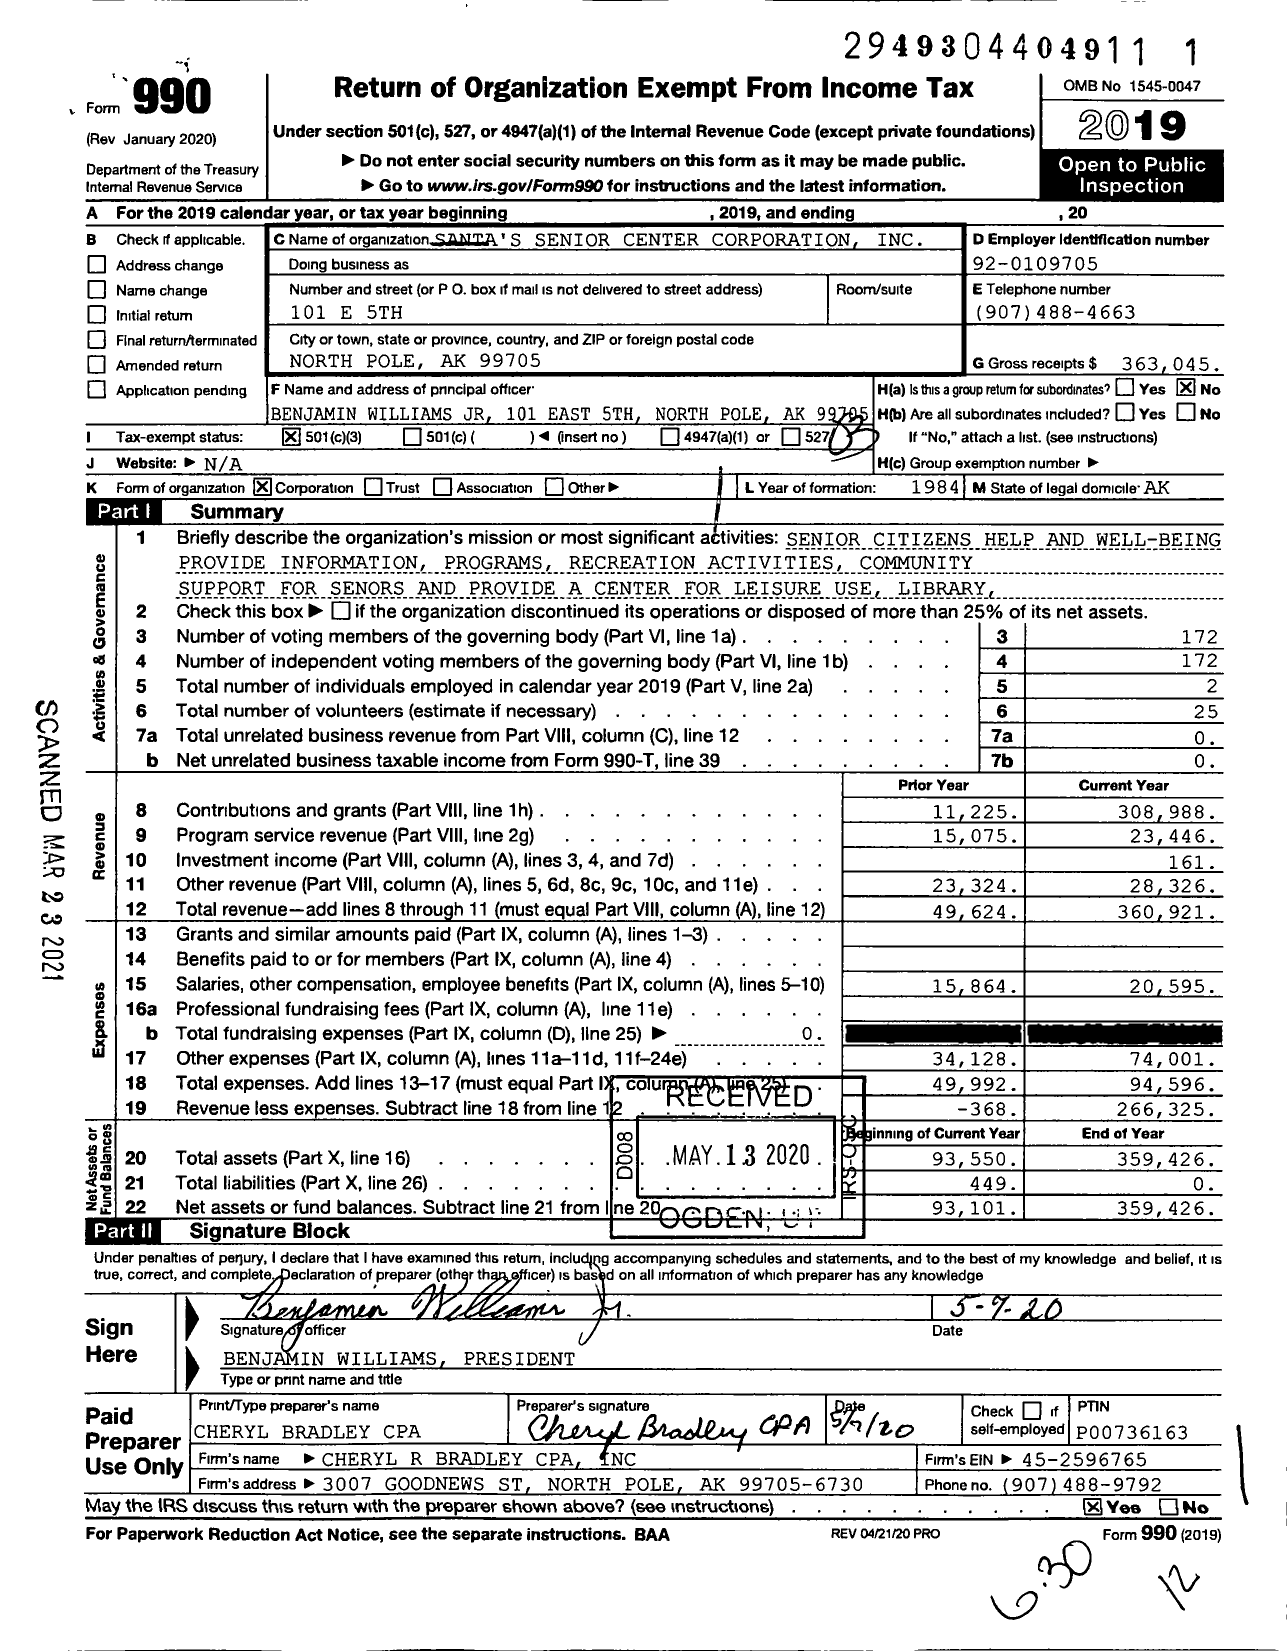 Image of first page of 2019 Form 990 for Santa's Senior Center Corporation